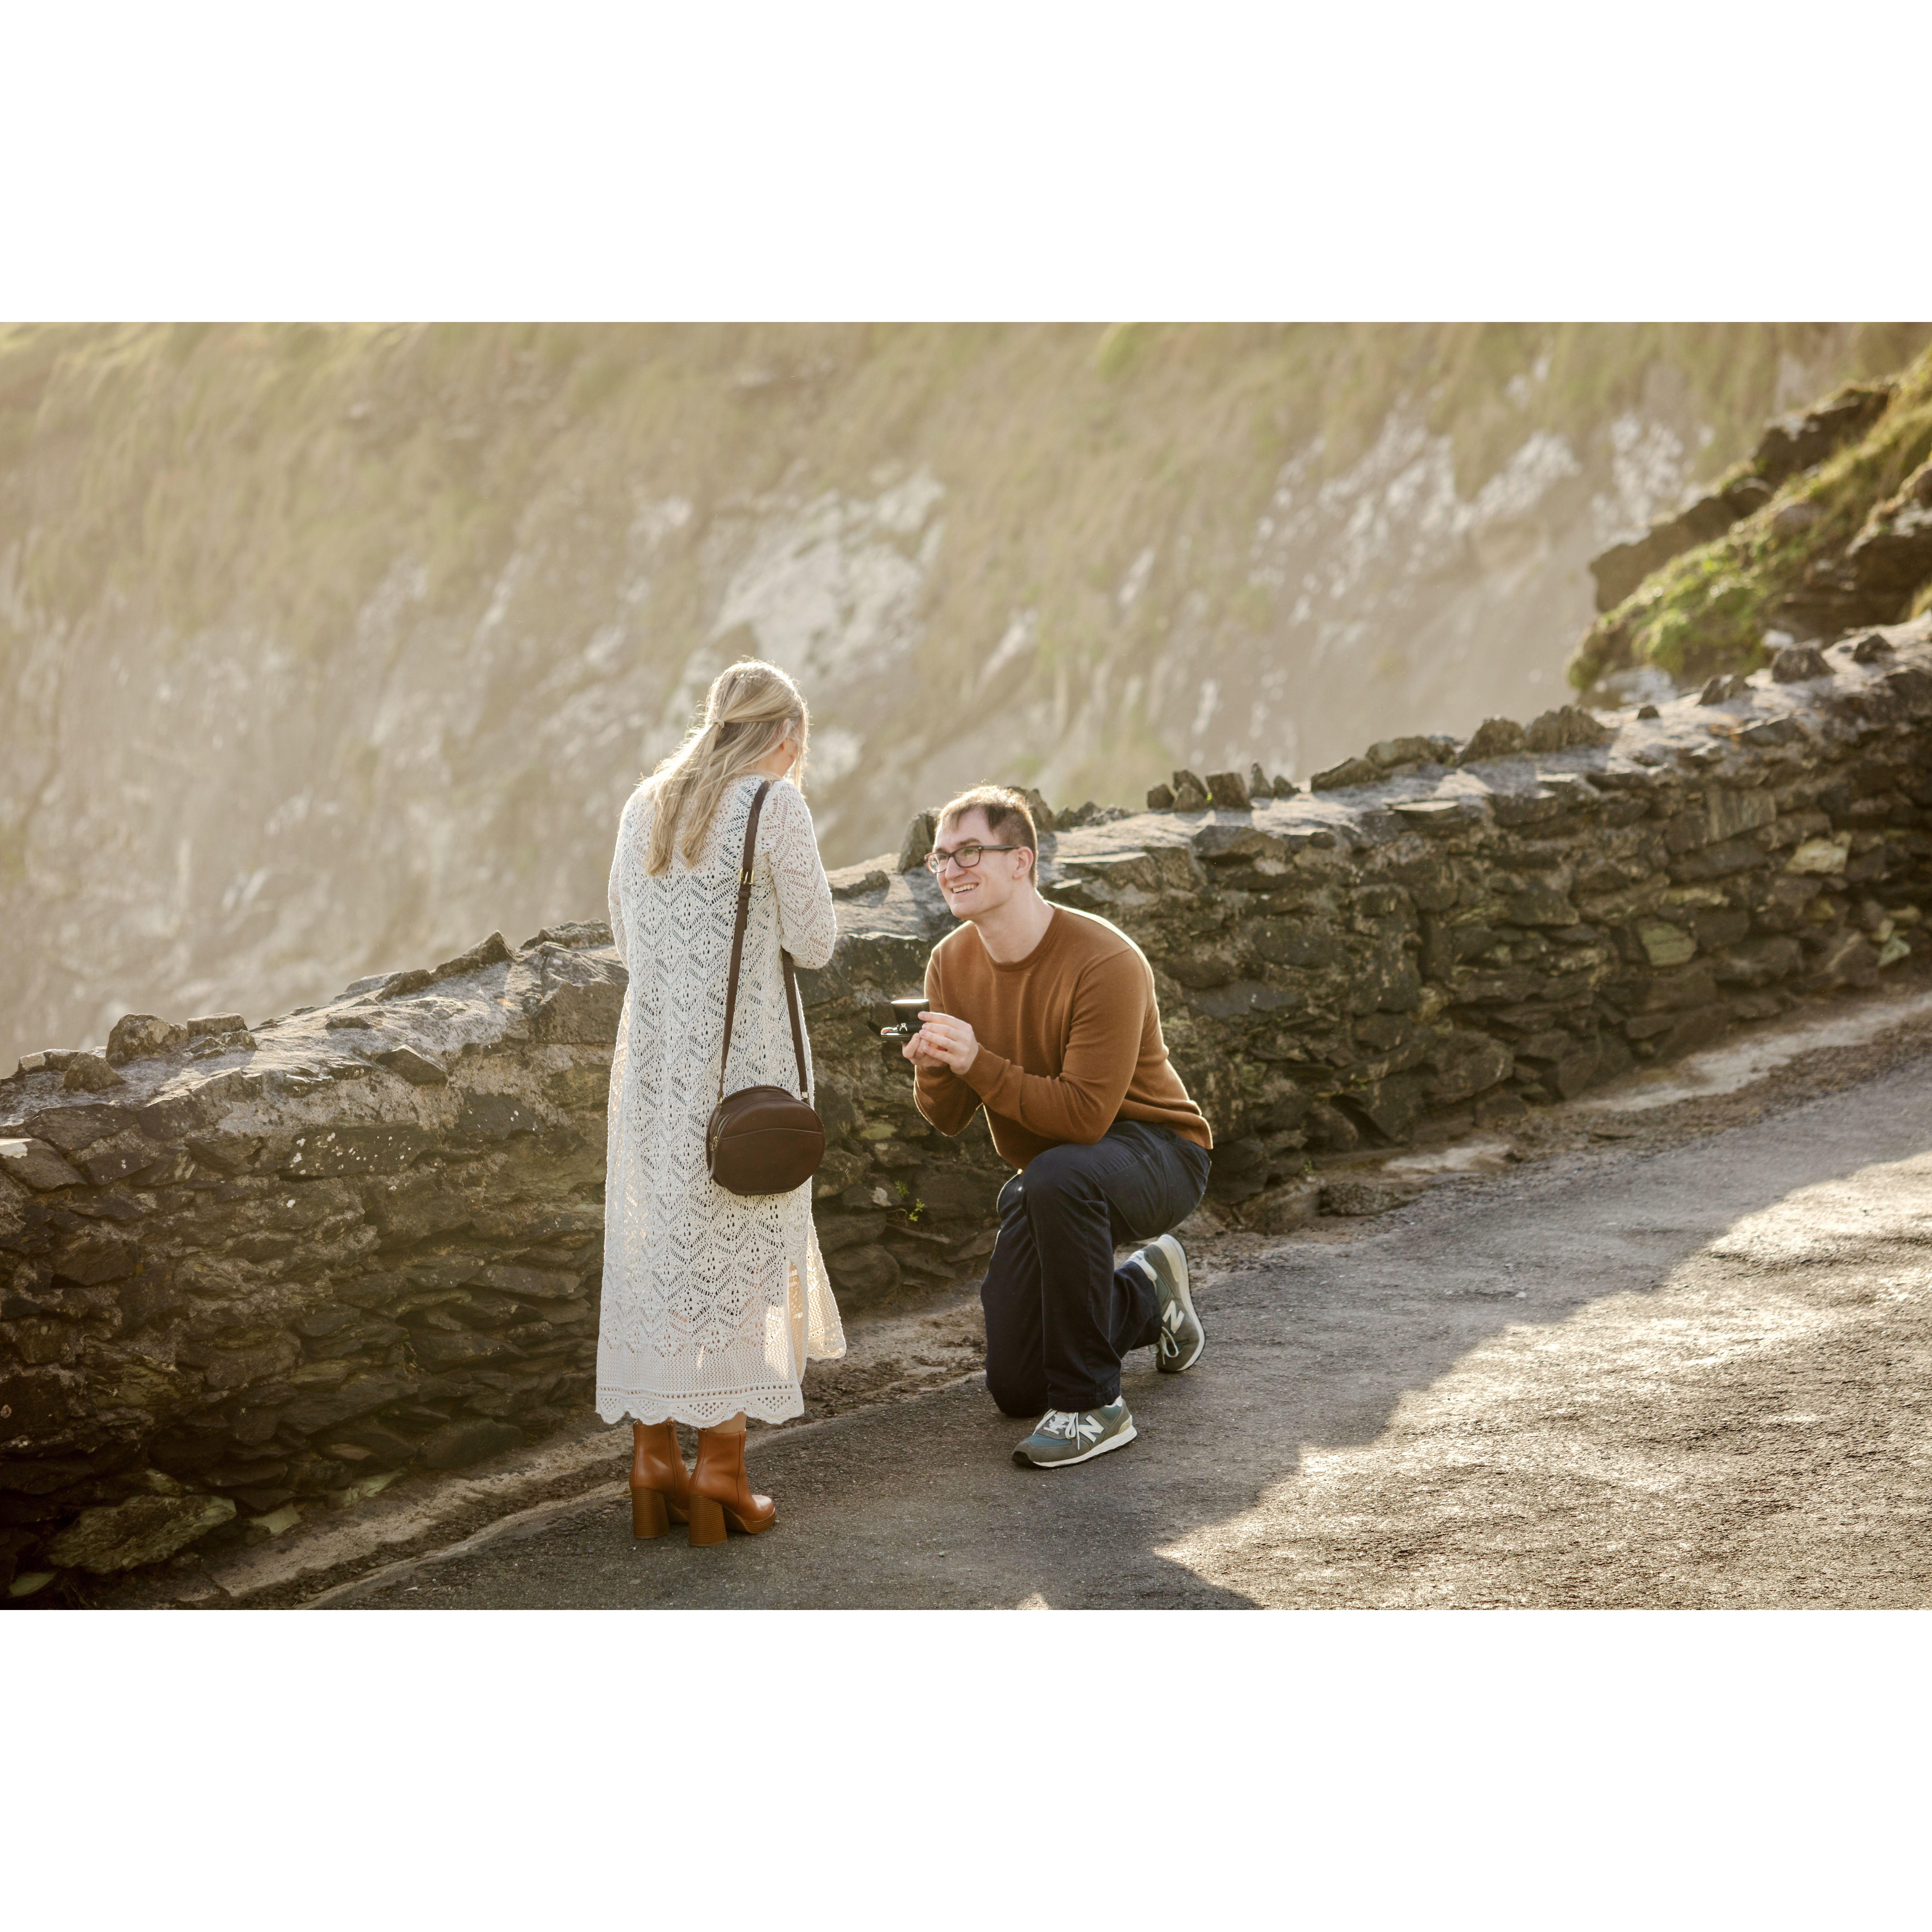 James proposed to Megan on the Dingle Peninsula in Ireland 04.10.23